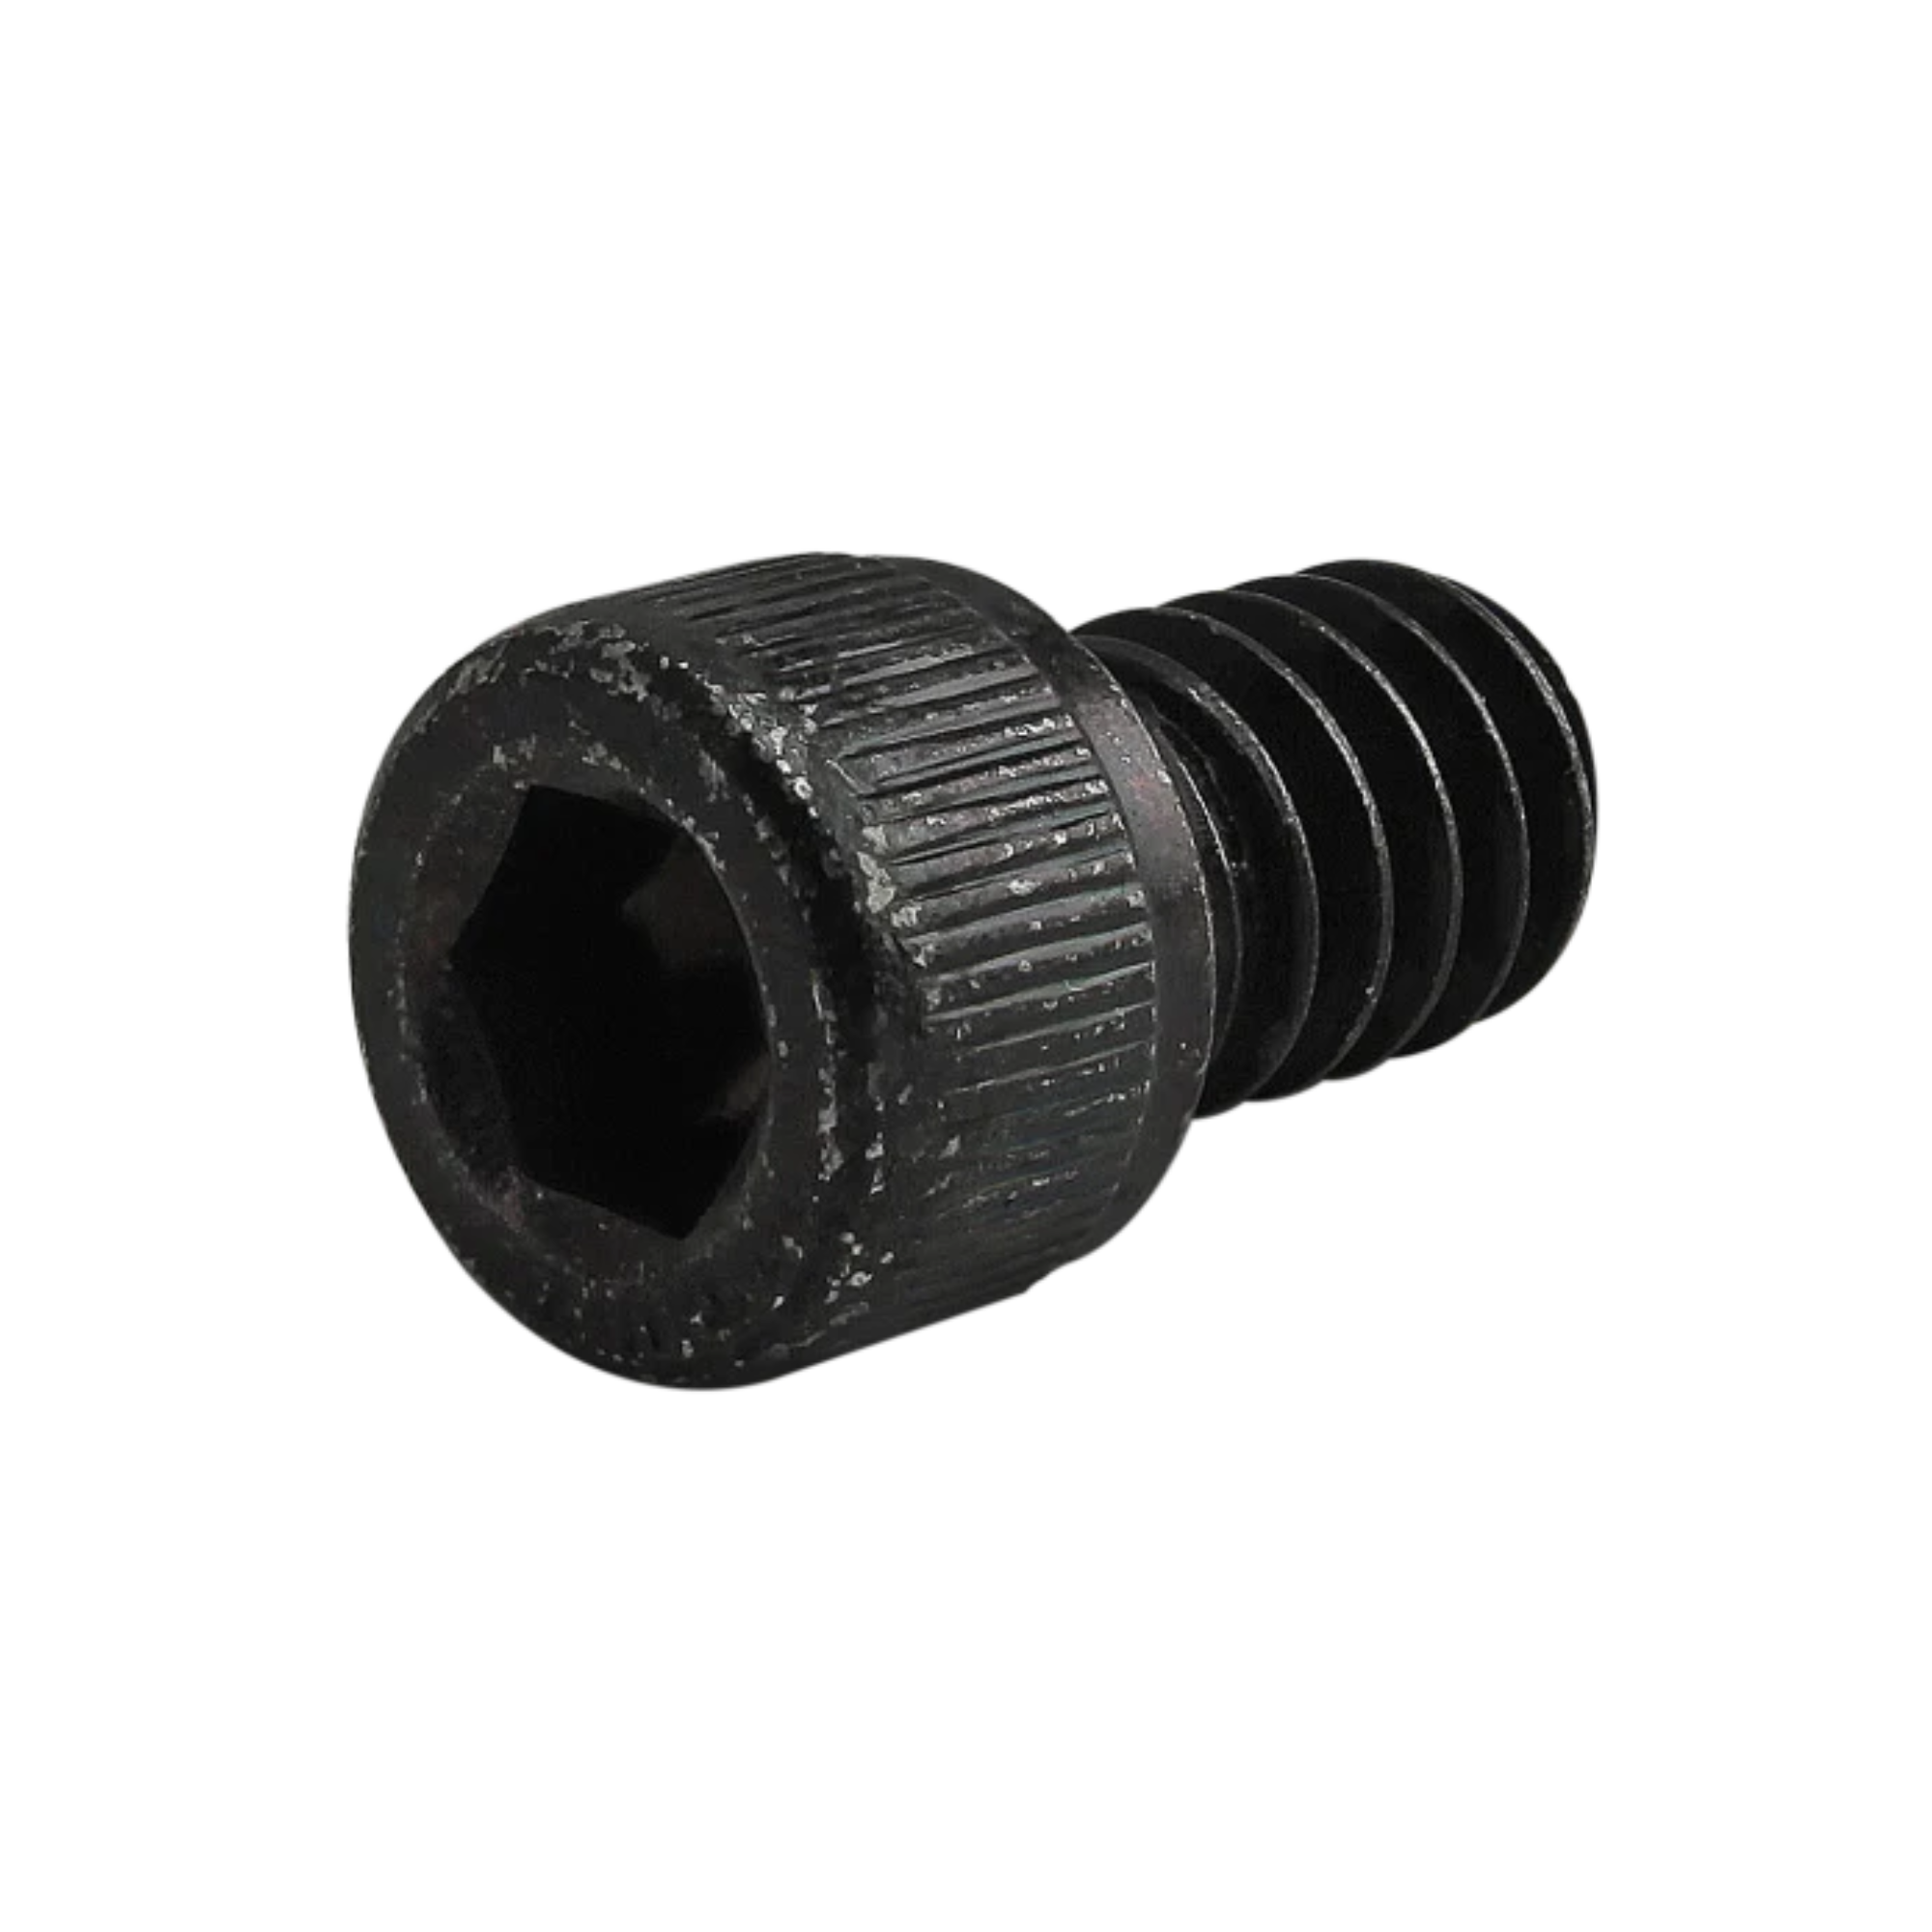 black socket head cap screw with the head on the left and threading on the right